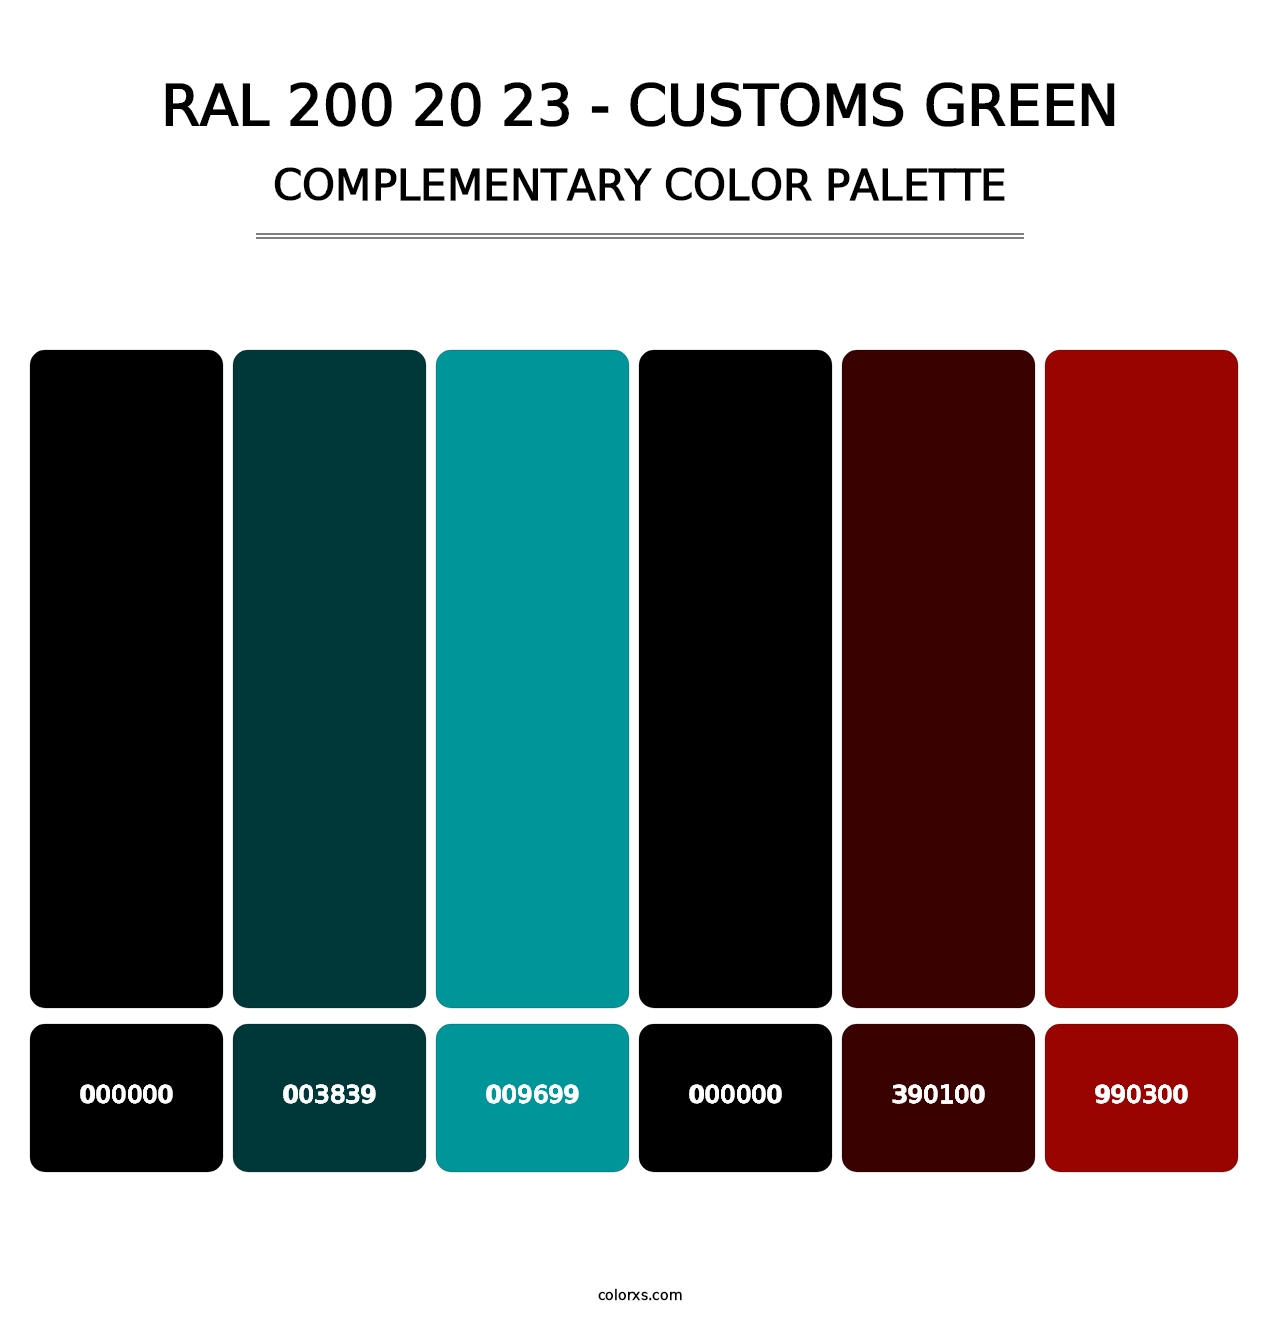 RAL 200 20 23 - Customs Green - Complementary Color Palette